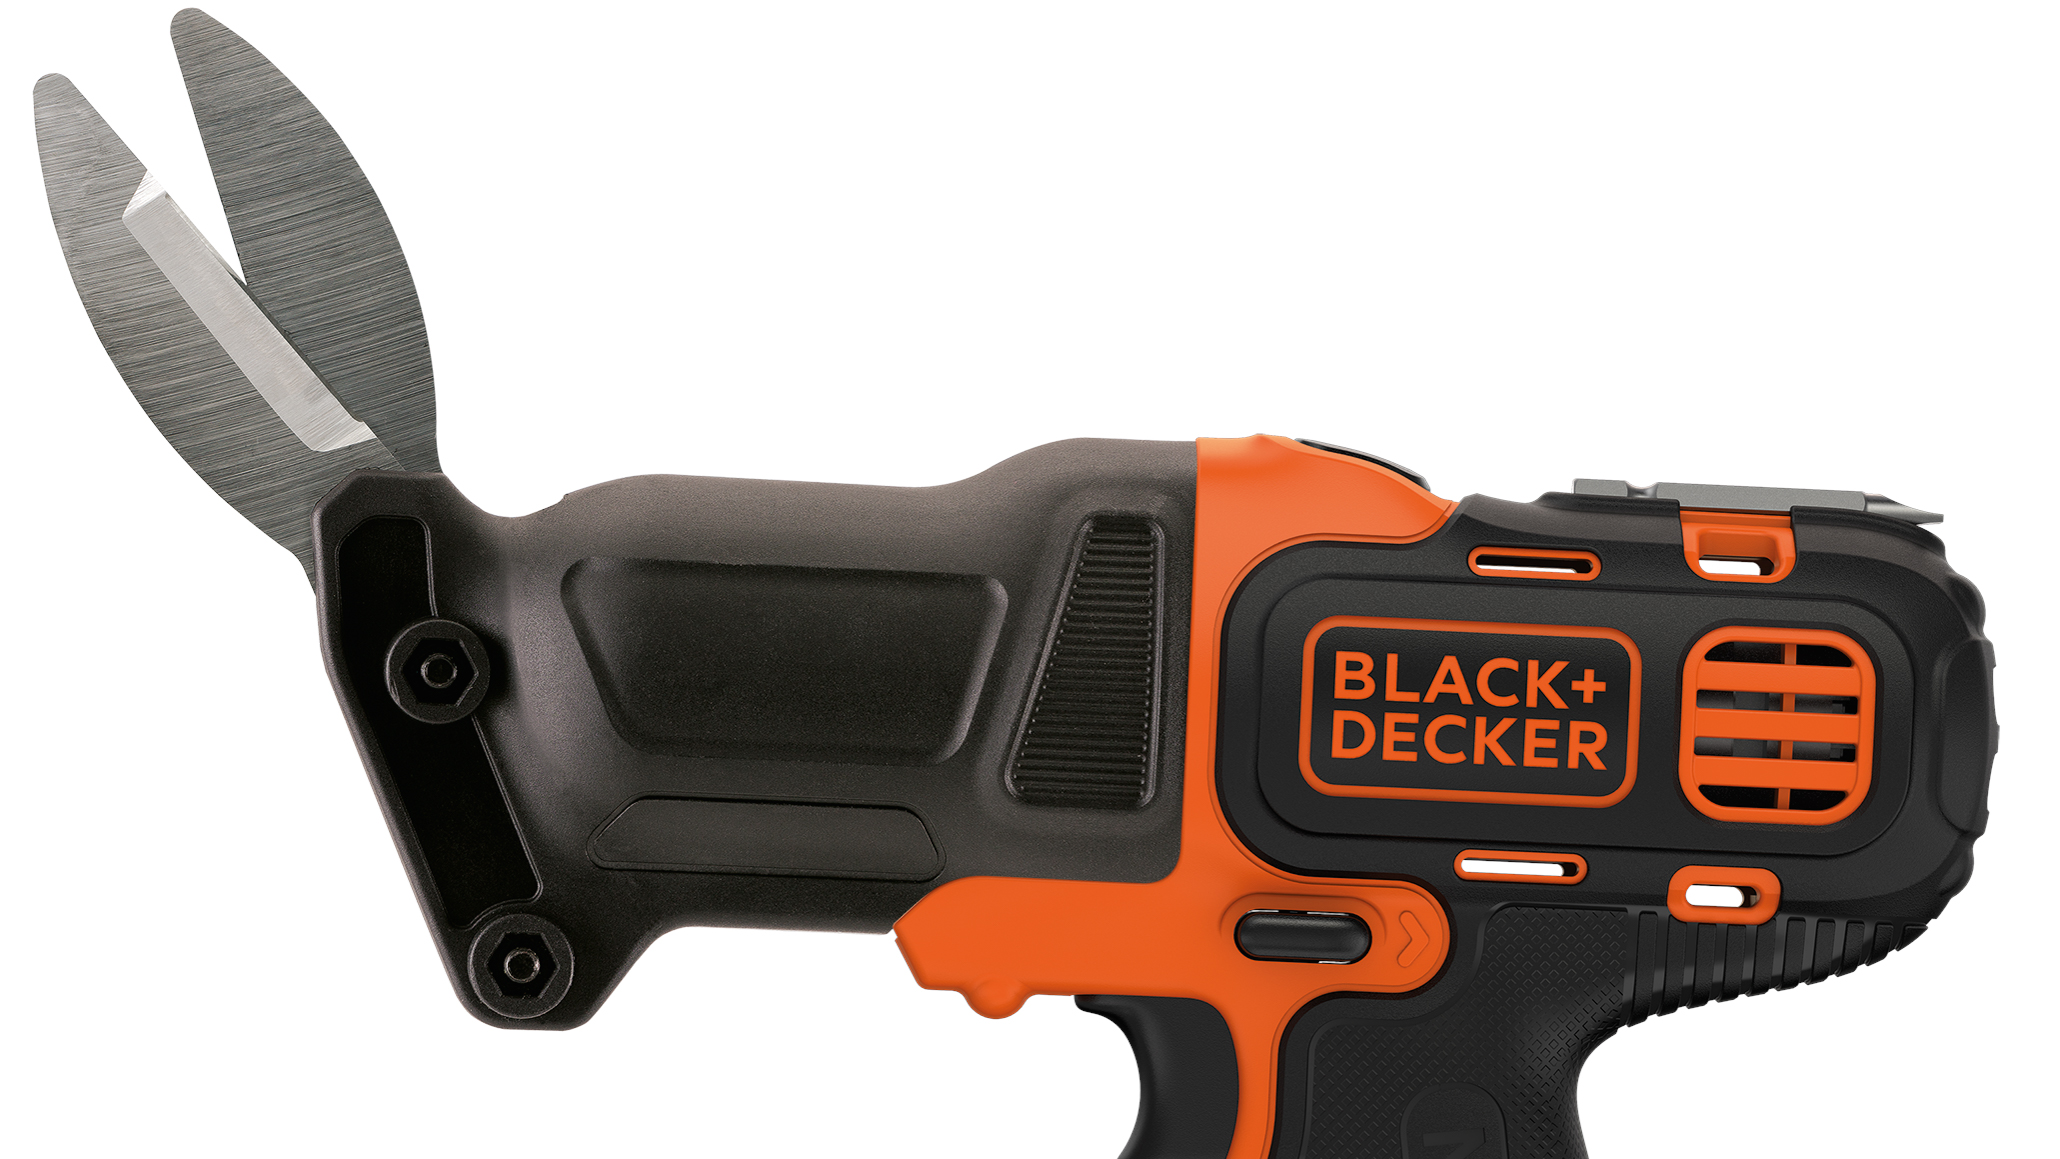 This attachment makes your Black and Decker drill into a pair of scissors  on steroids